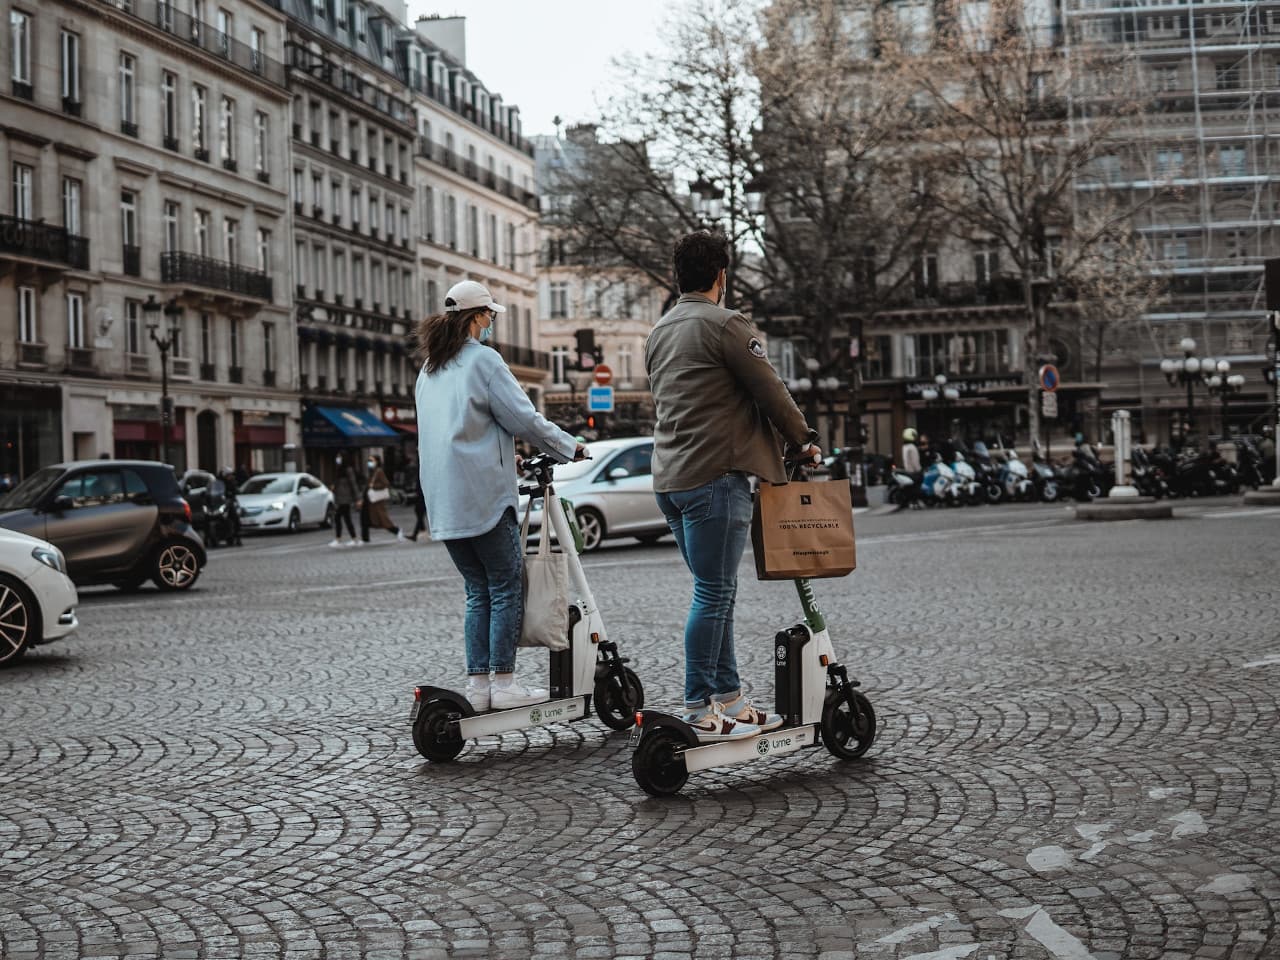 Budget friendly eco-scooters